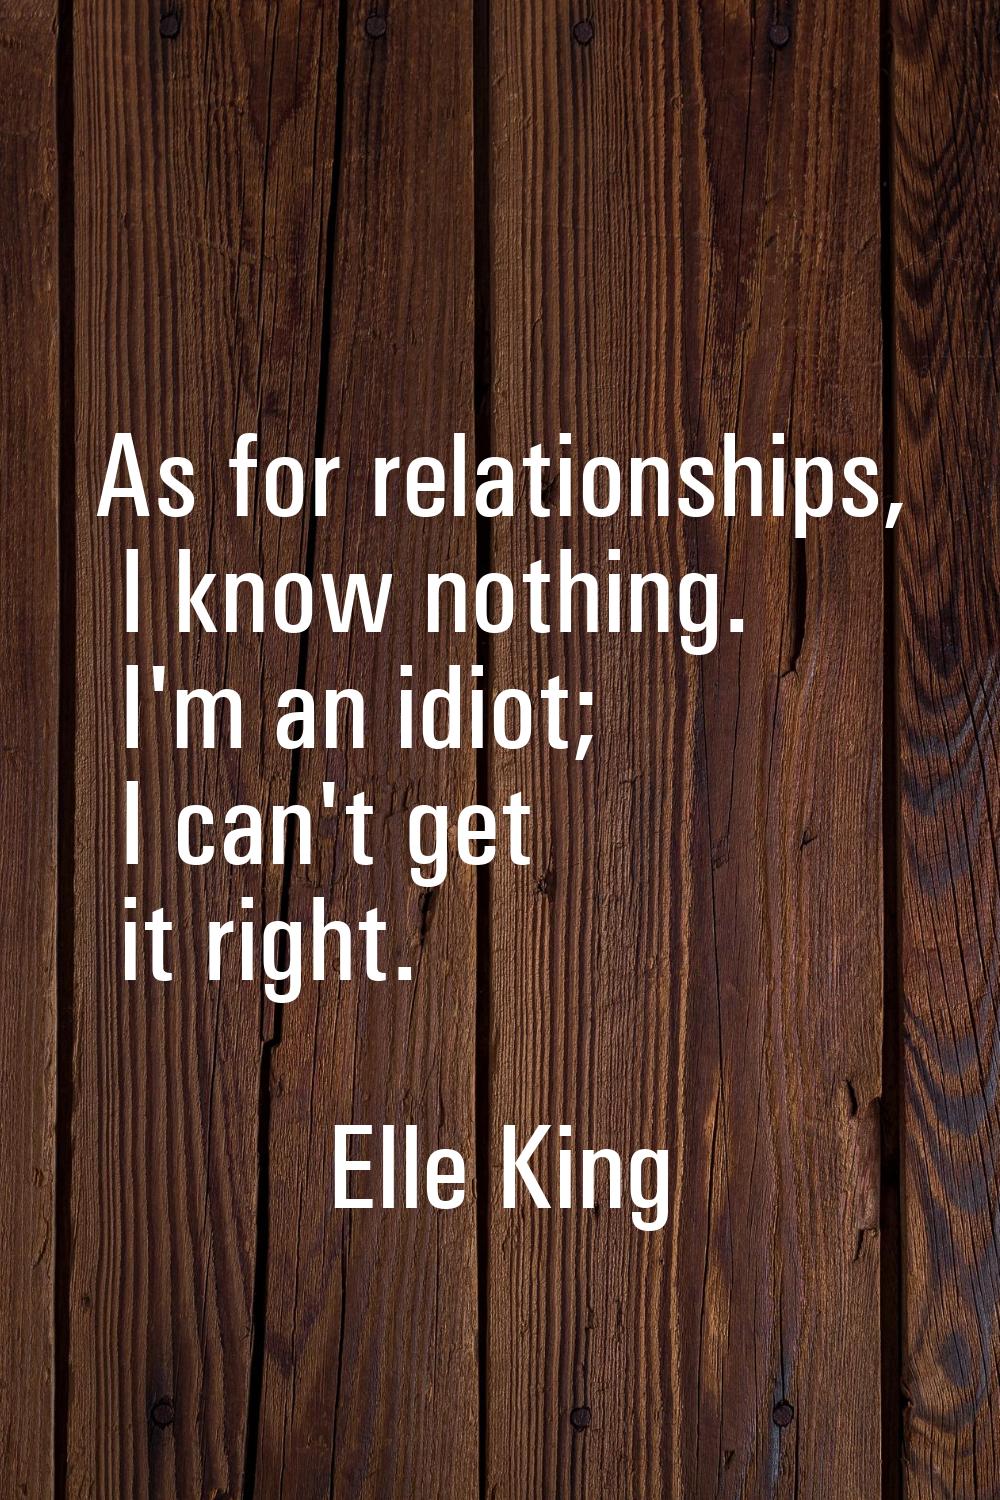 As for relationships, I know nothing. I'm an idiot; I can't get it right.